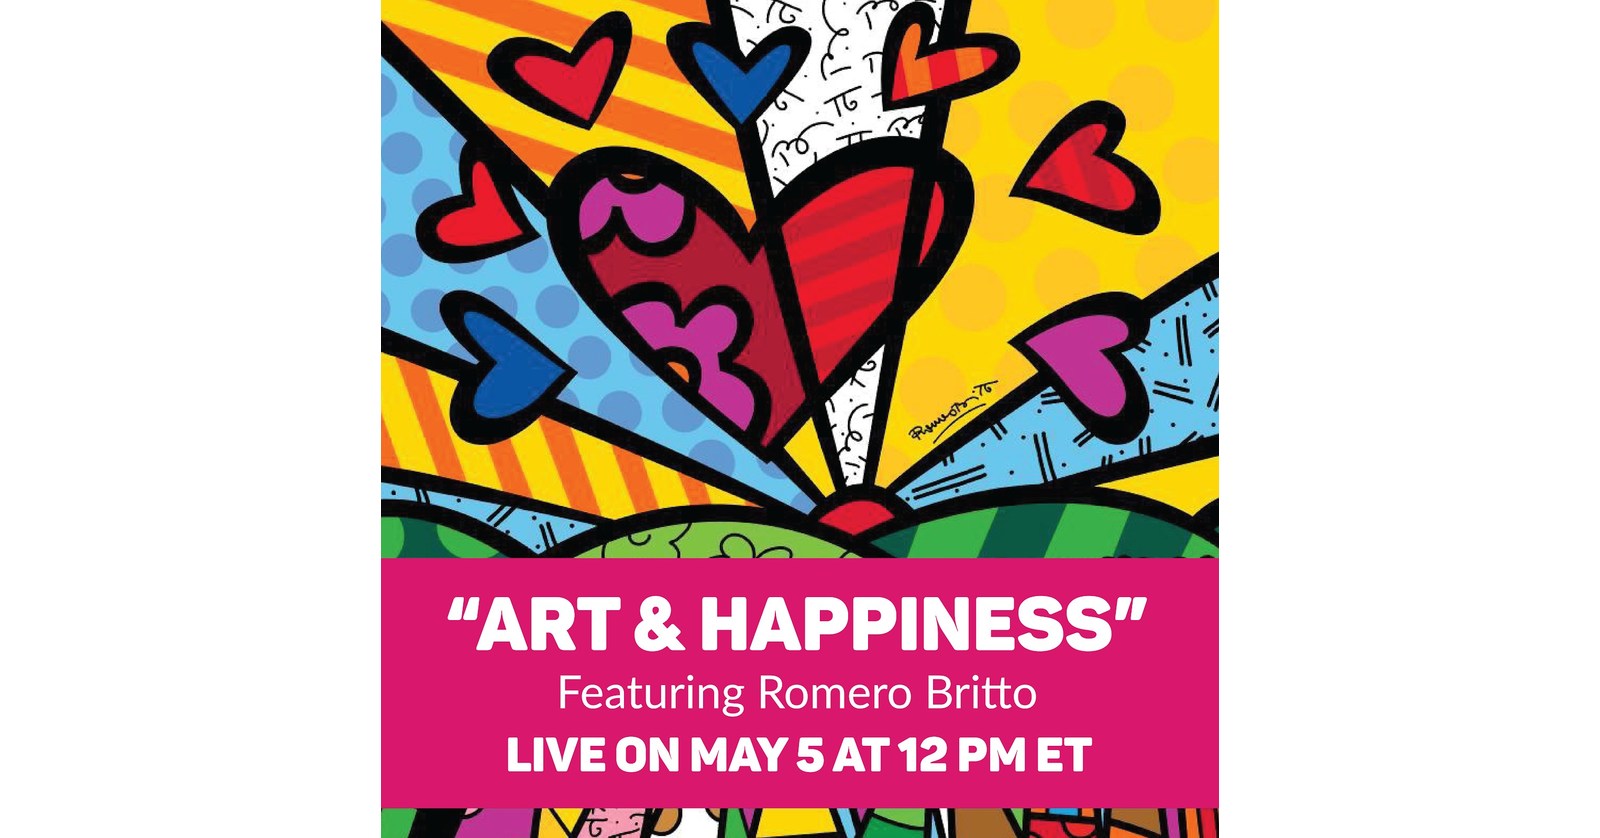 Artist Romero Britto makes a career out of happiness